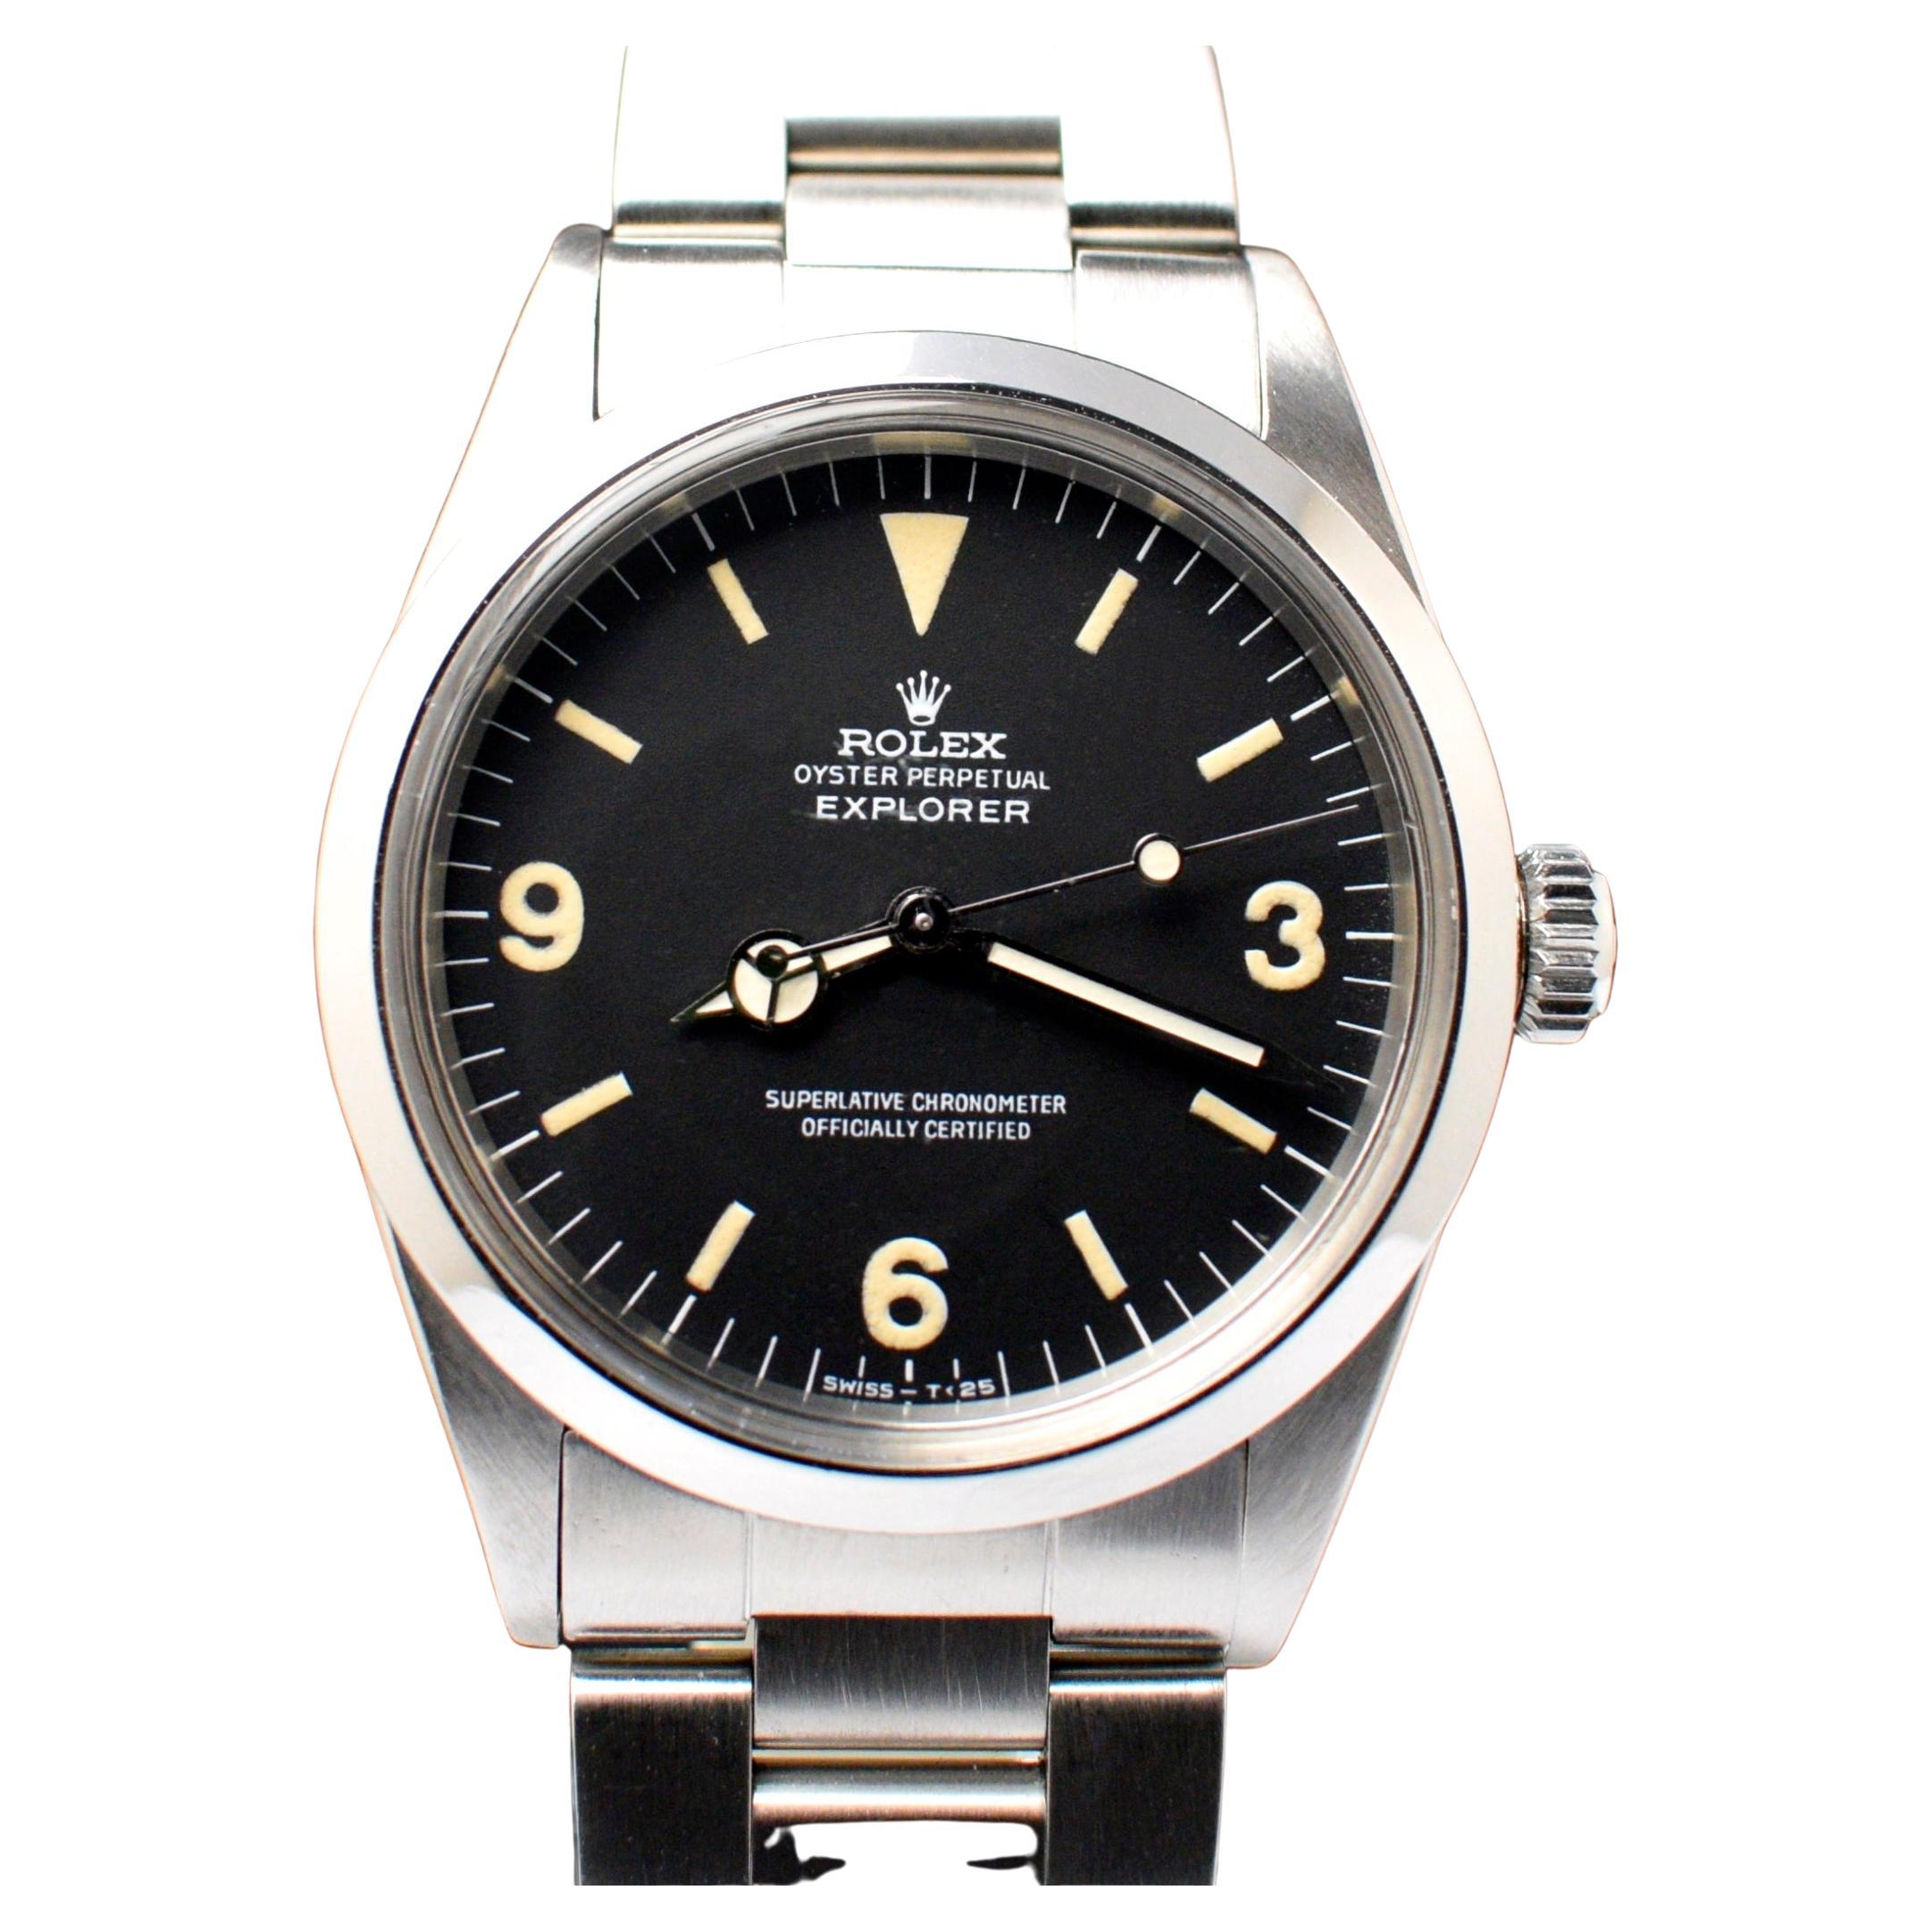 Rolex Oyster Perpetual Explorer Matte Dial 1016 Steel Automatic Watch, 1972